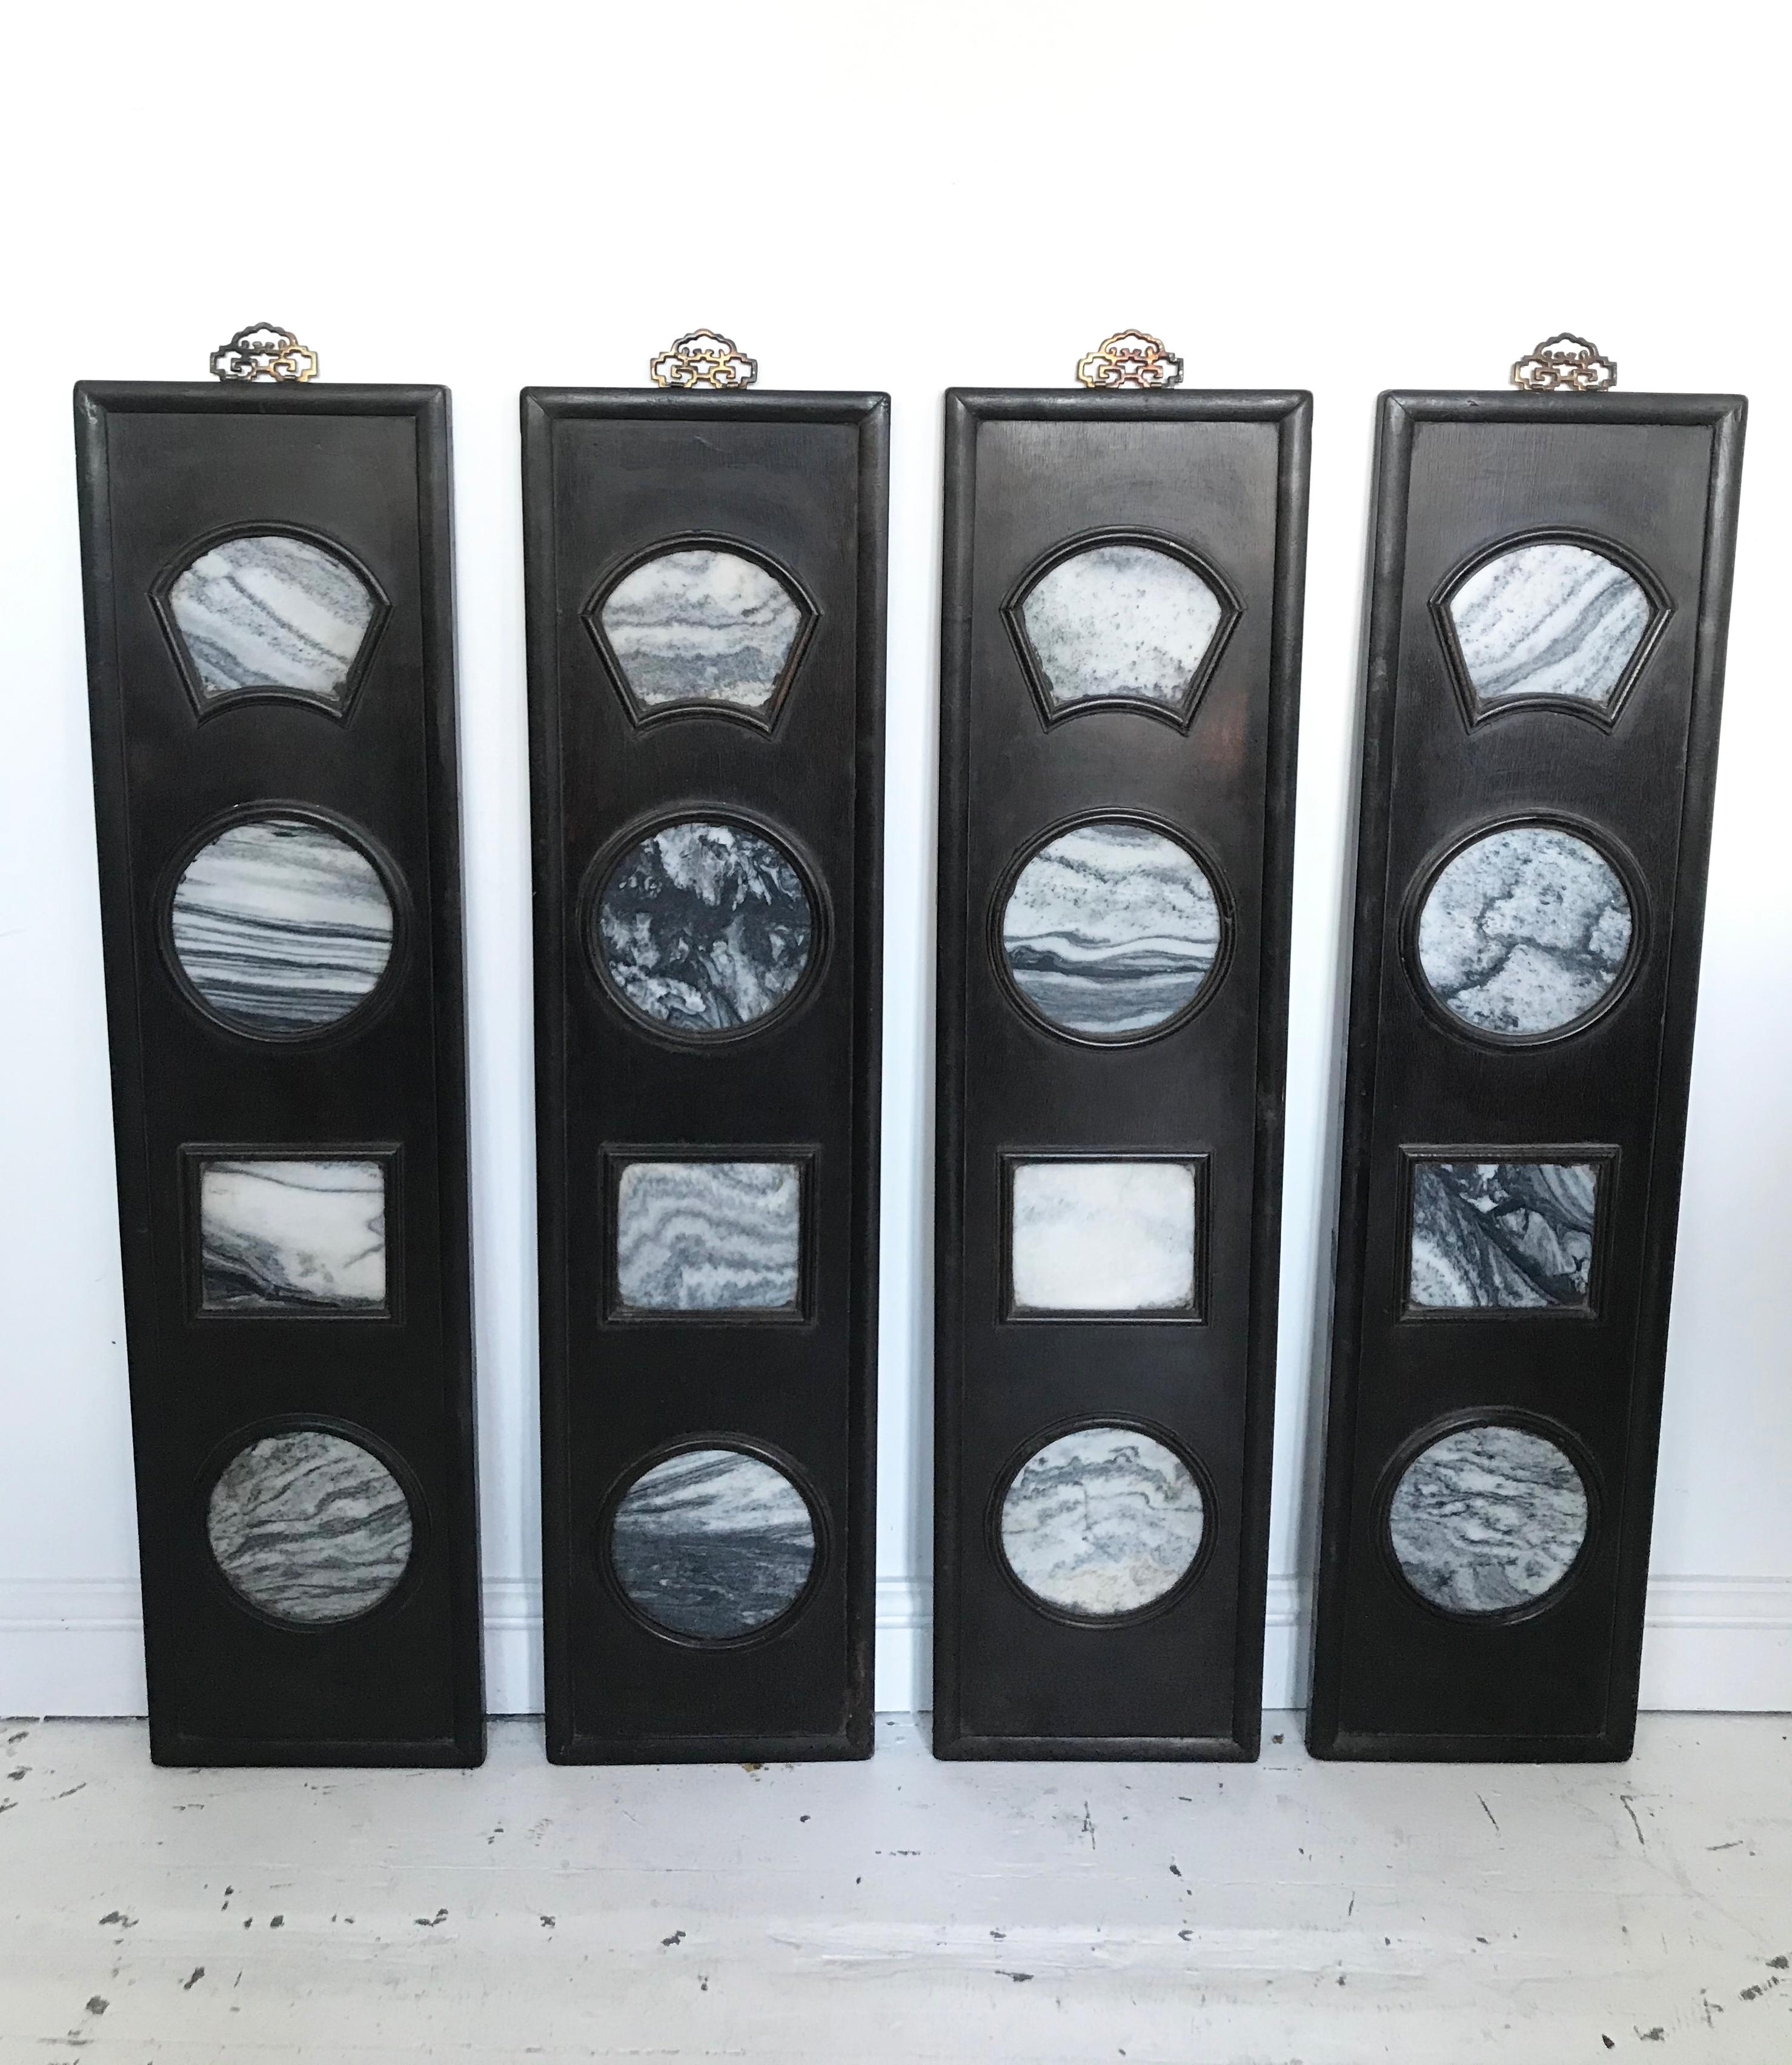 This is a set of four antique Chinese Dali stone panels which depict wonderful landscape images. The stone is set in an ebonized panel frame. They look wonderful grouped together on the wall.